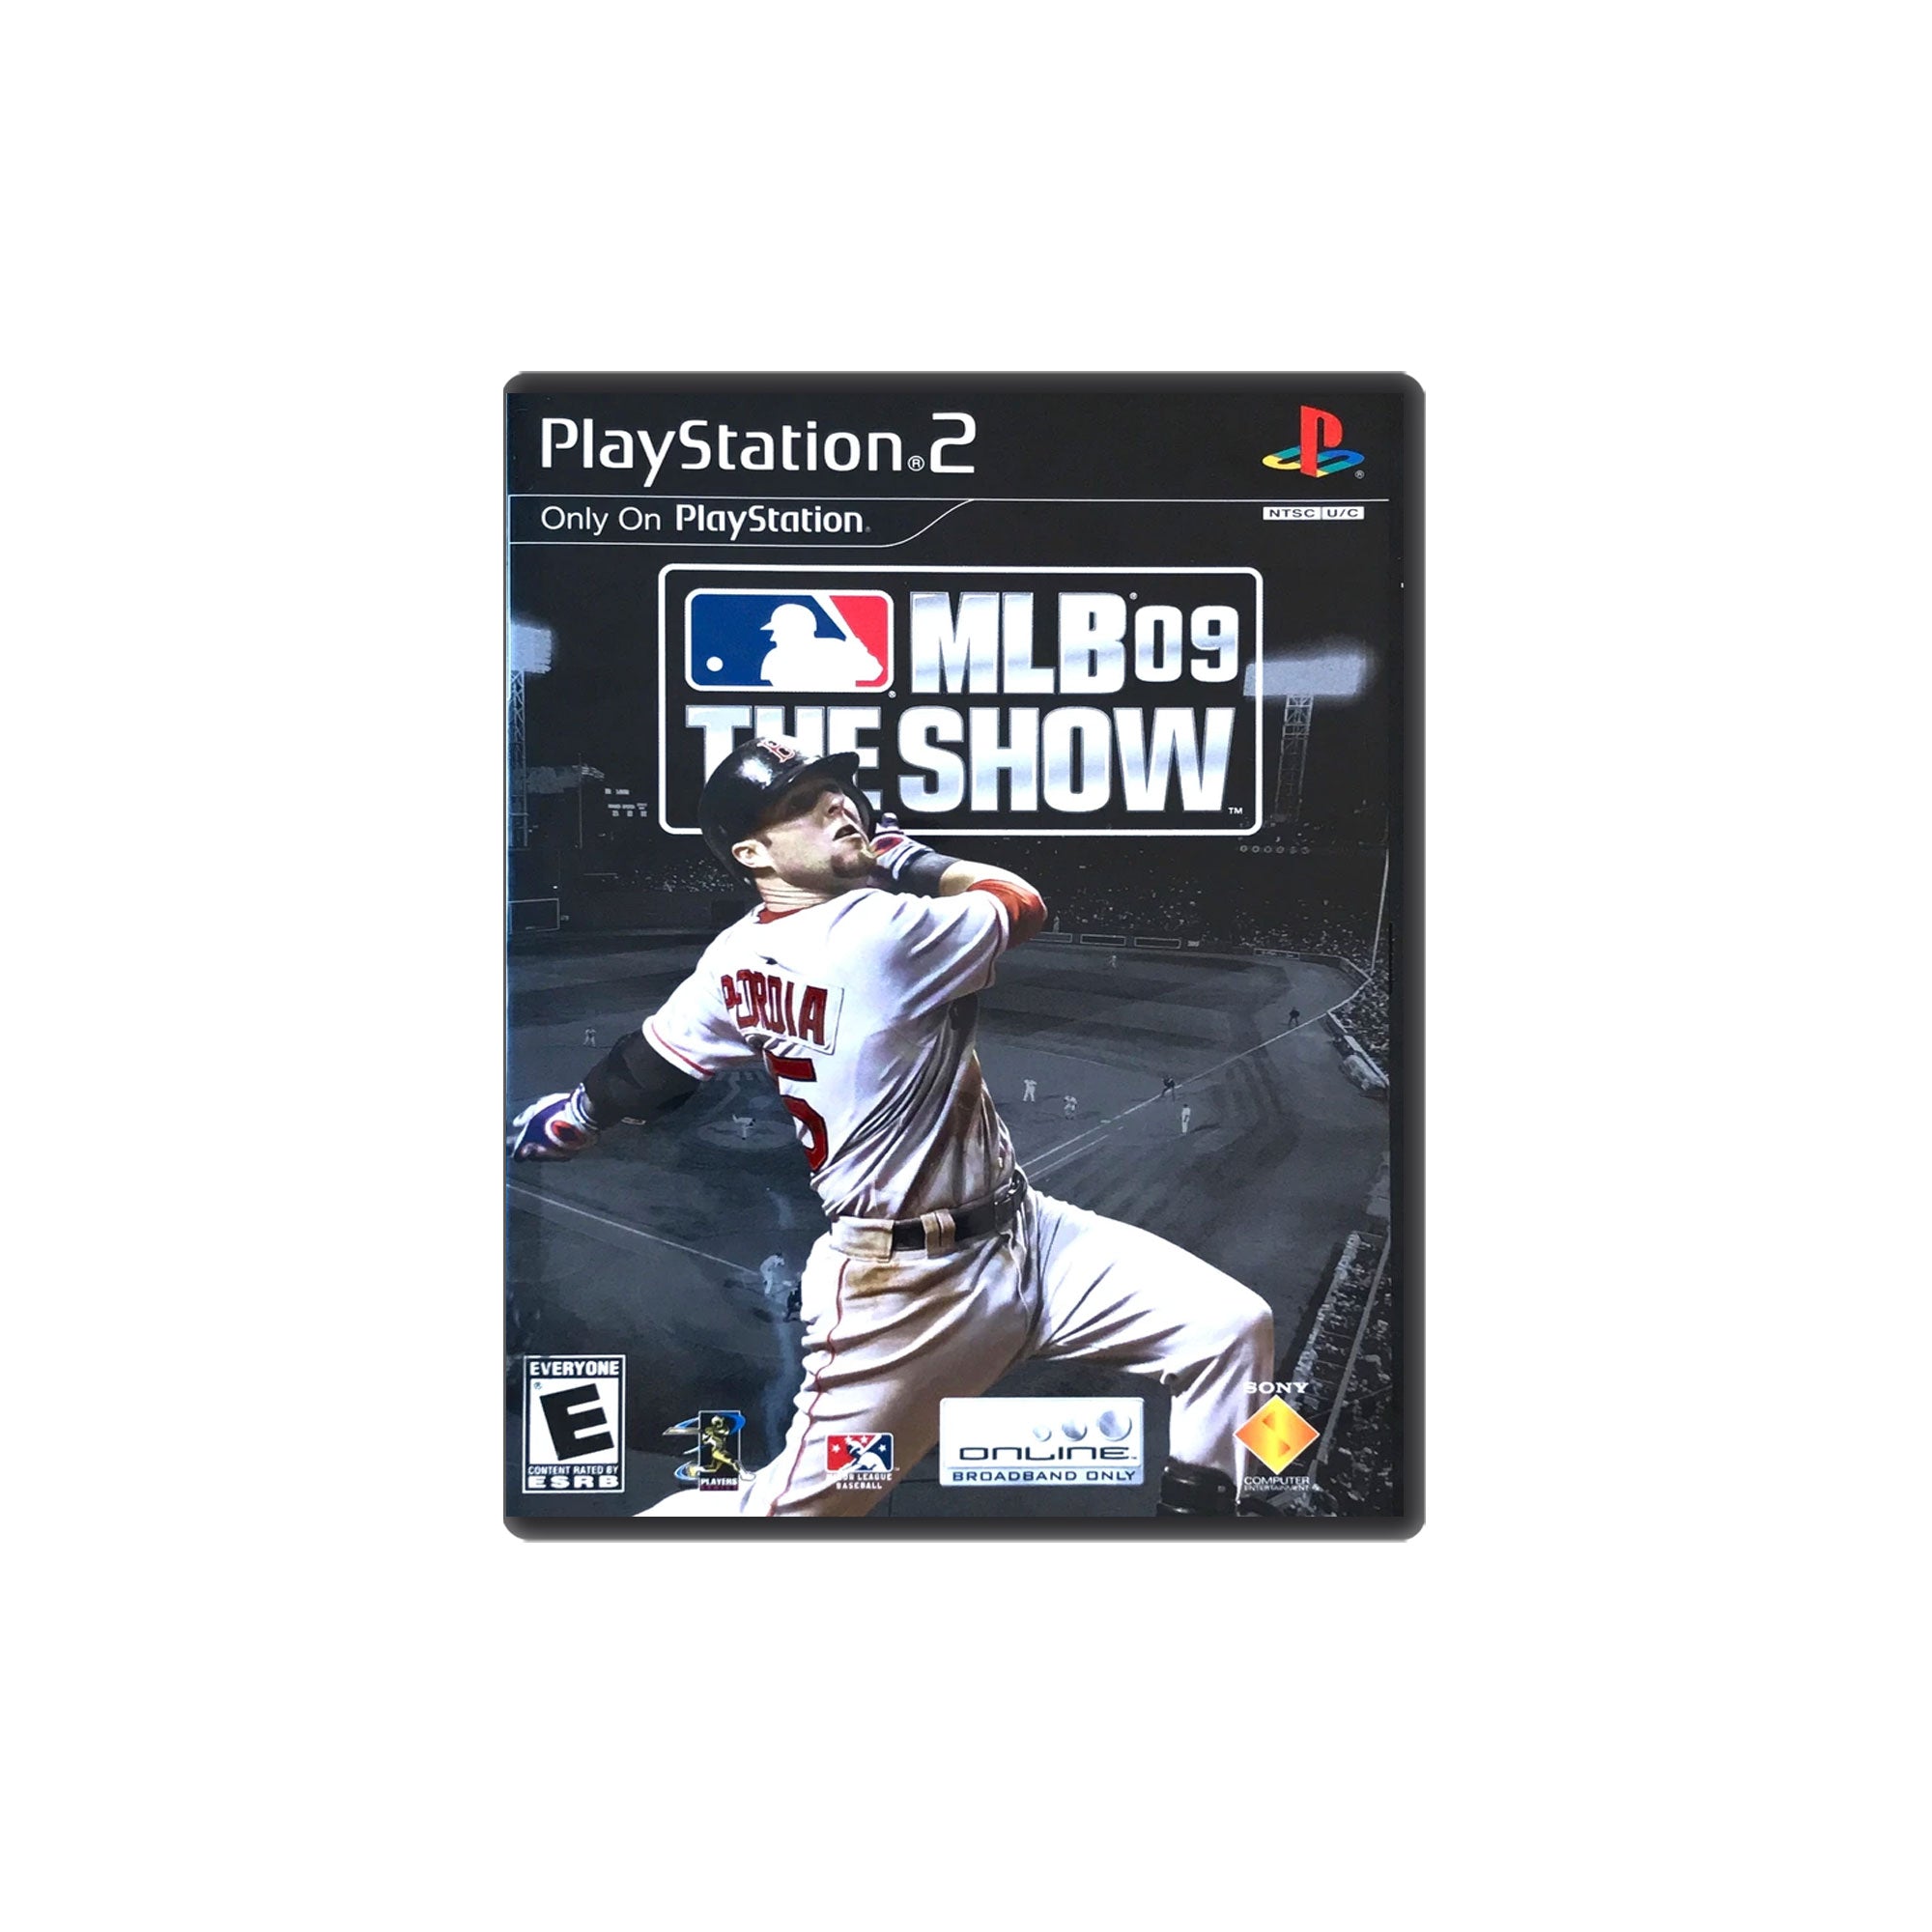 Swifty Games - MLB 09 The Show (Playstation 2, 2008)